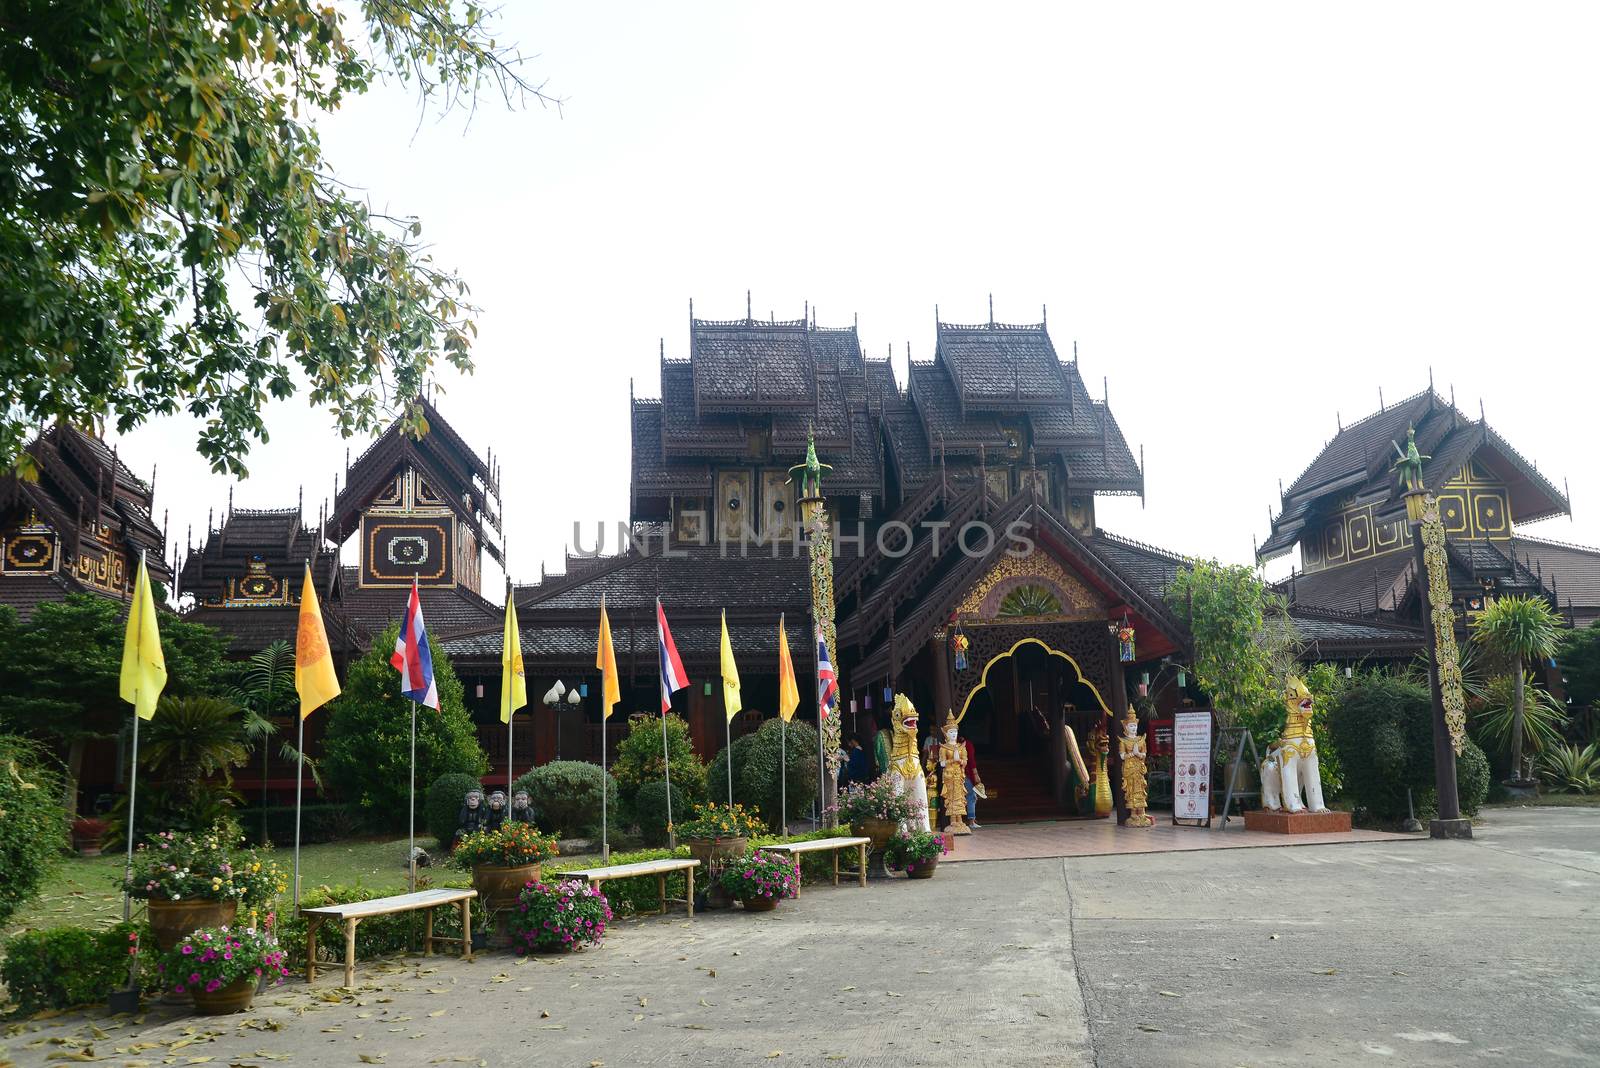 Wat Nantaram is a Tai Yai (Shan-style) community temple in central Chiang Kham and exhibits the classic Tai Yai roof architecture, somewhat extraordinary by ideation90